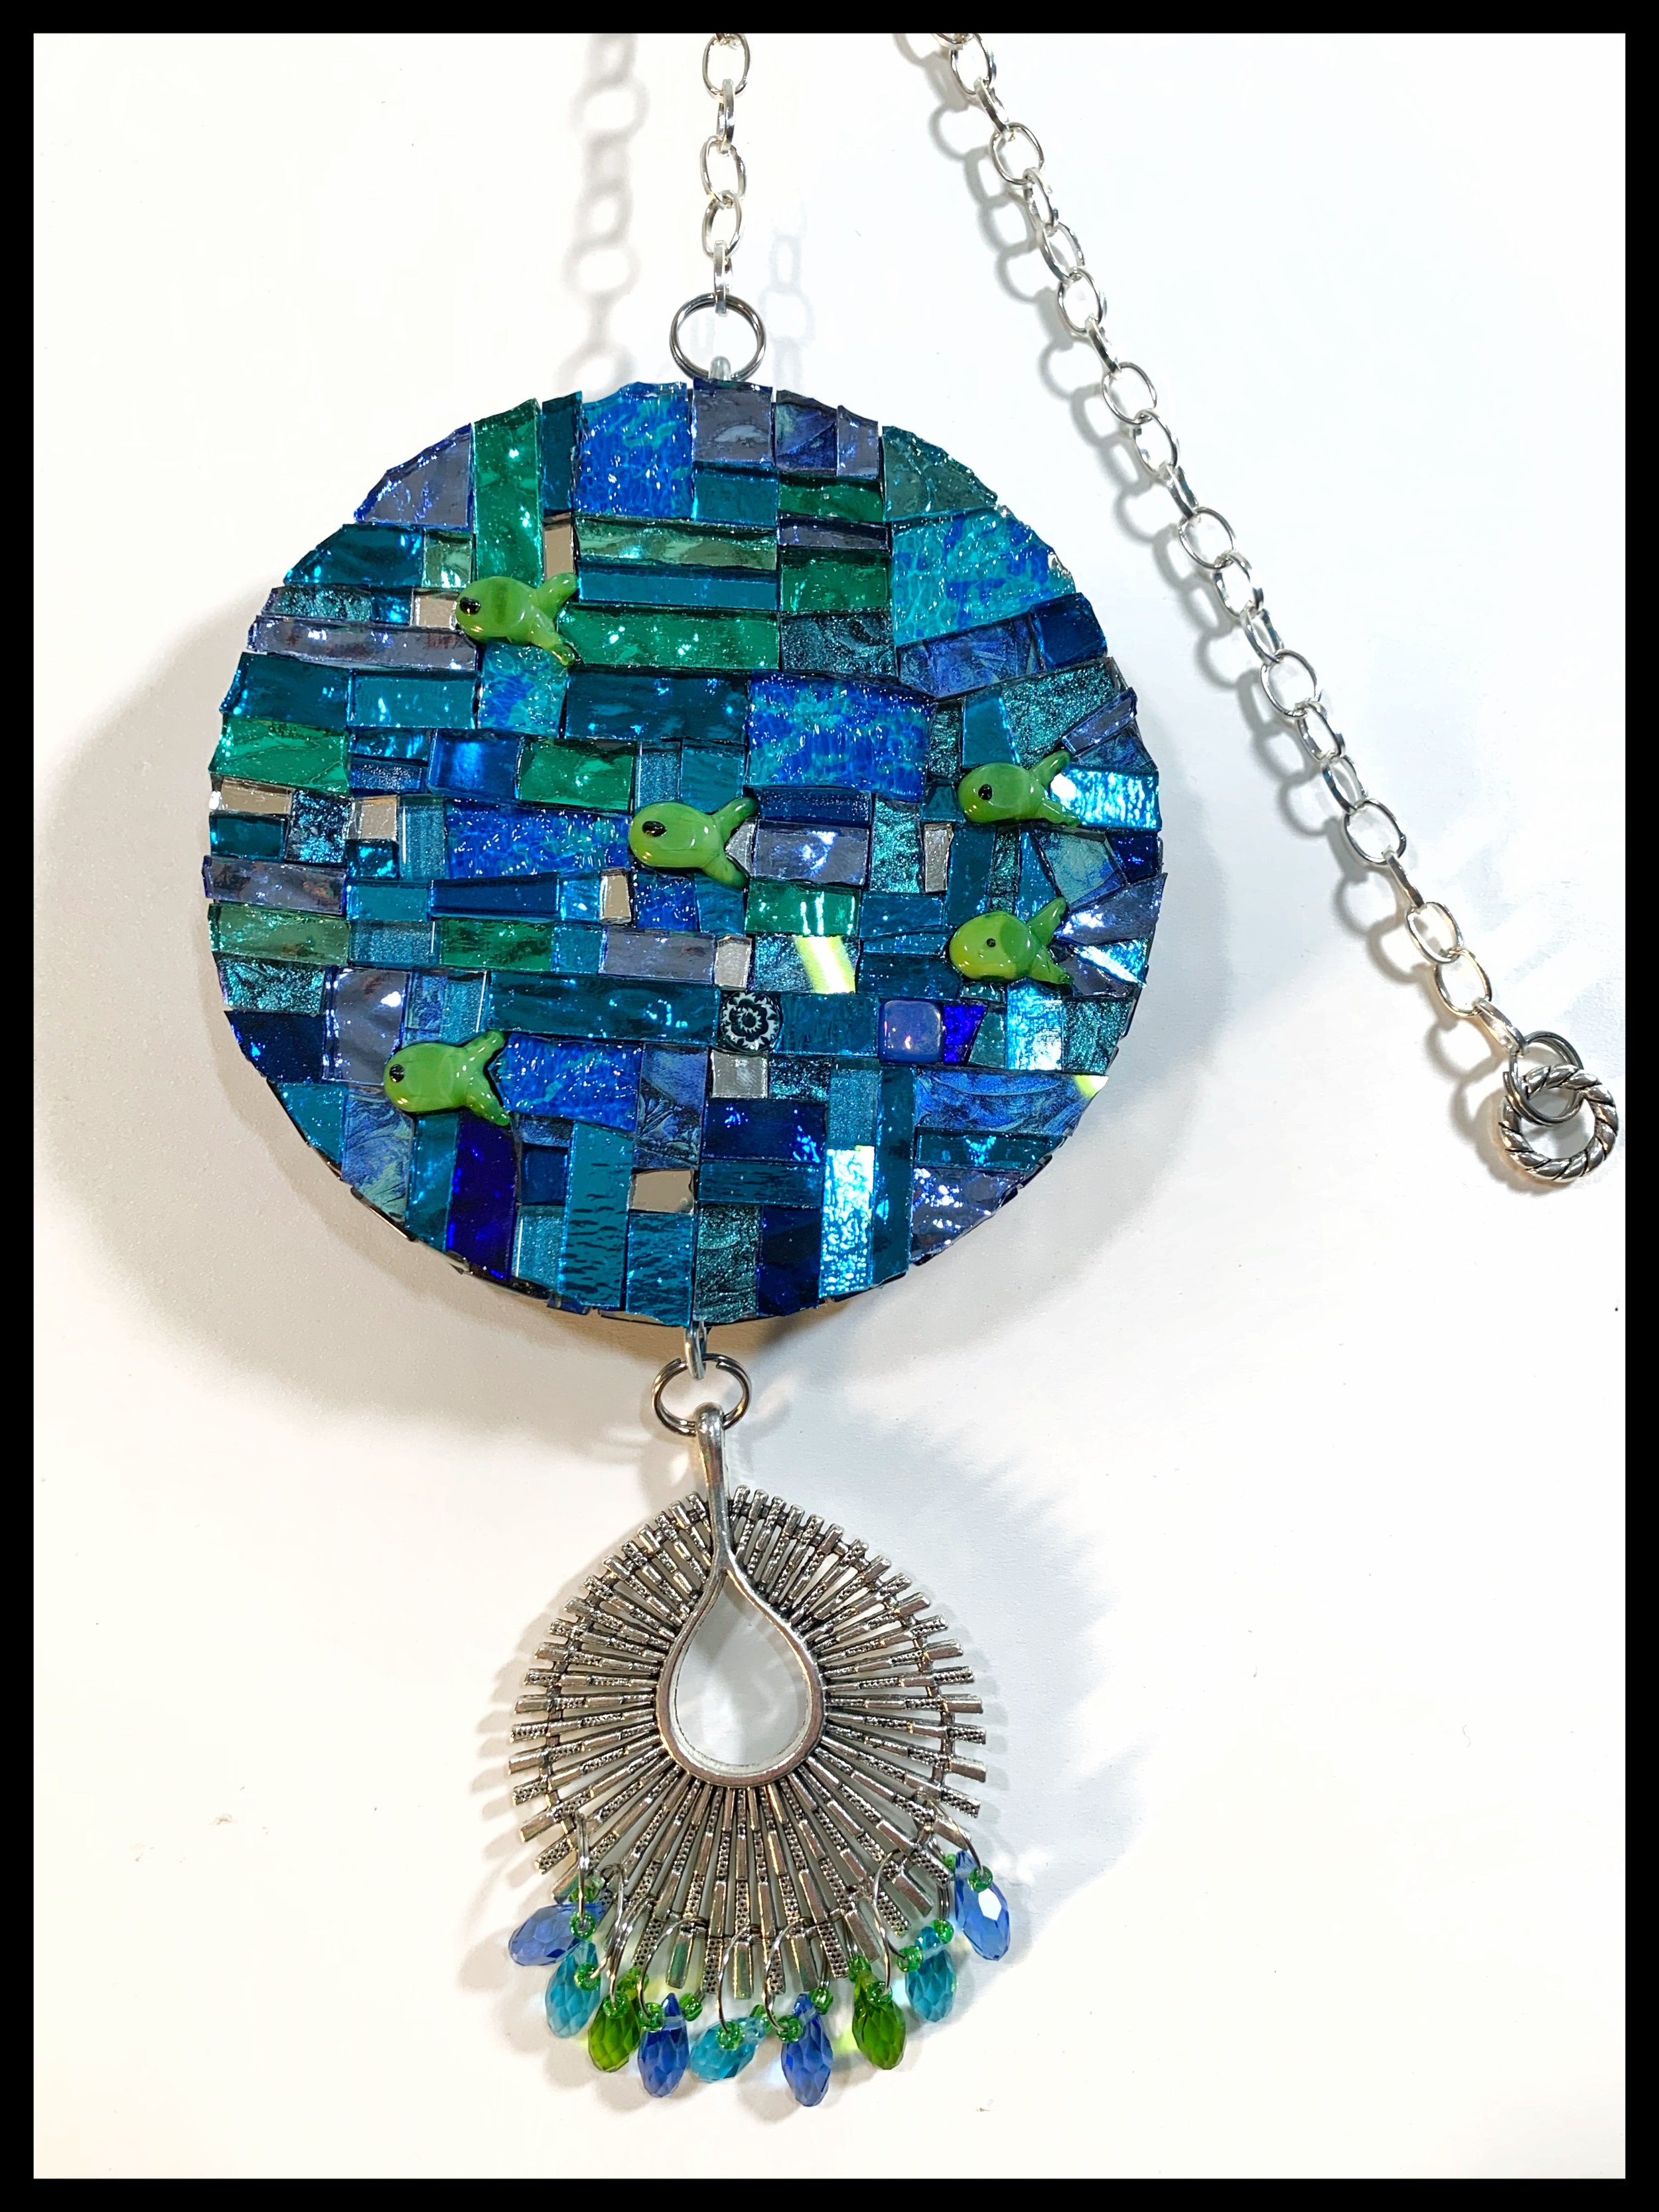 Mosaic Window Jewelry in Sea Blue/Green and Glass Fish